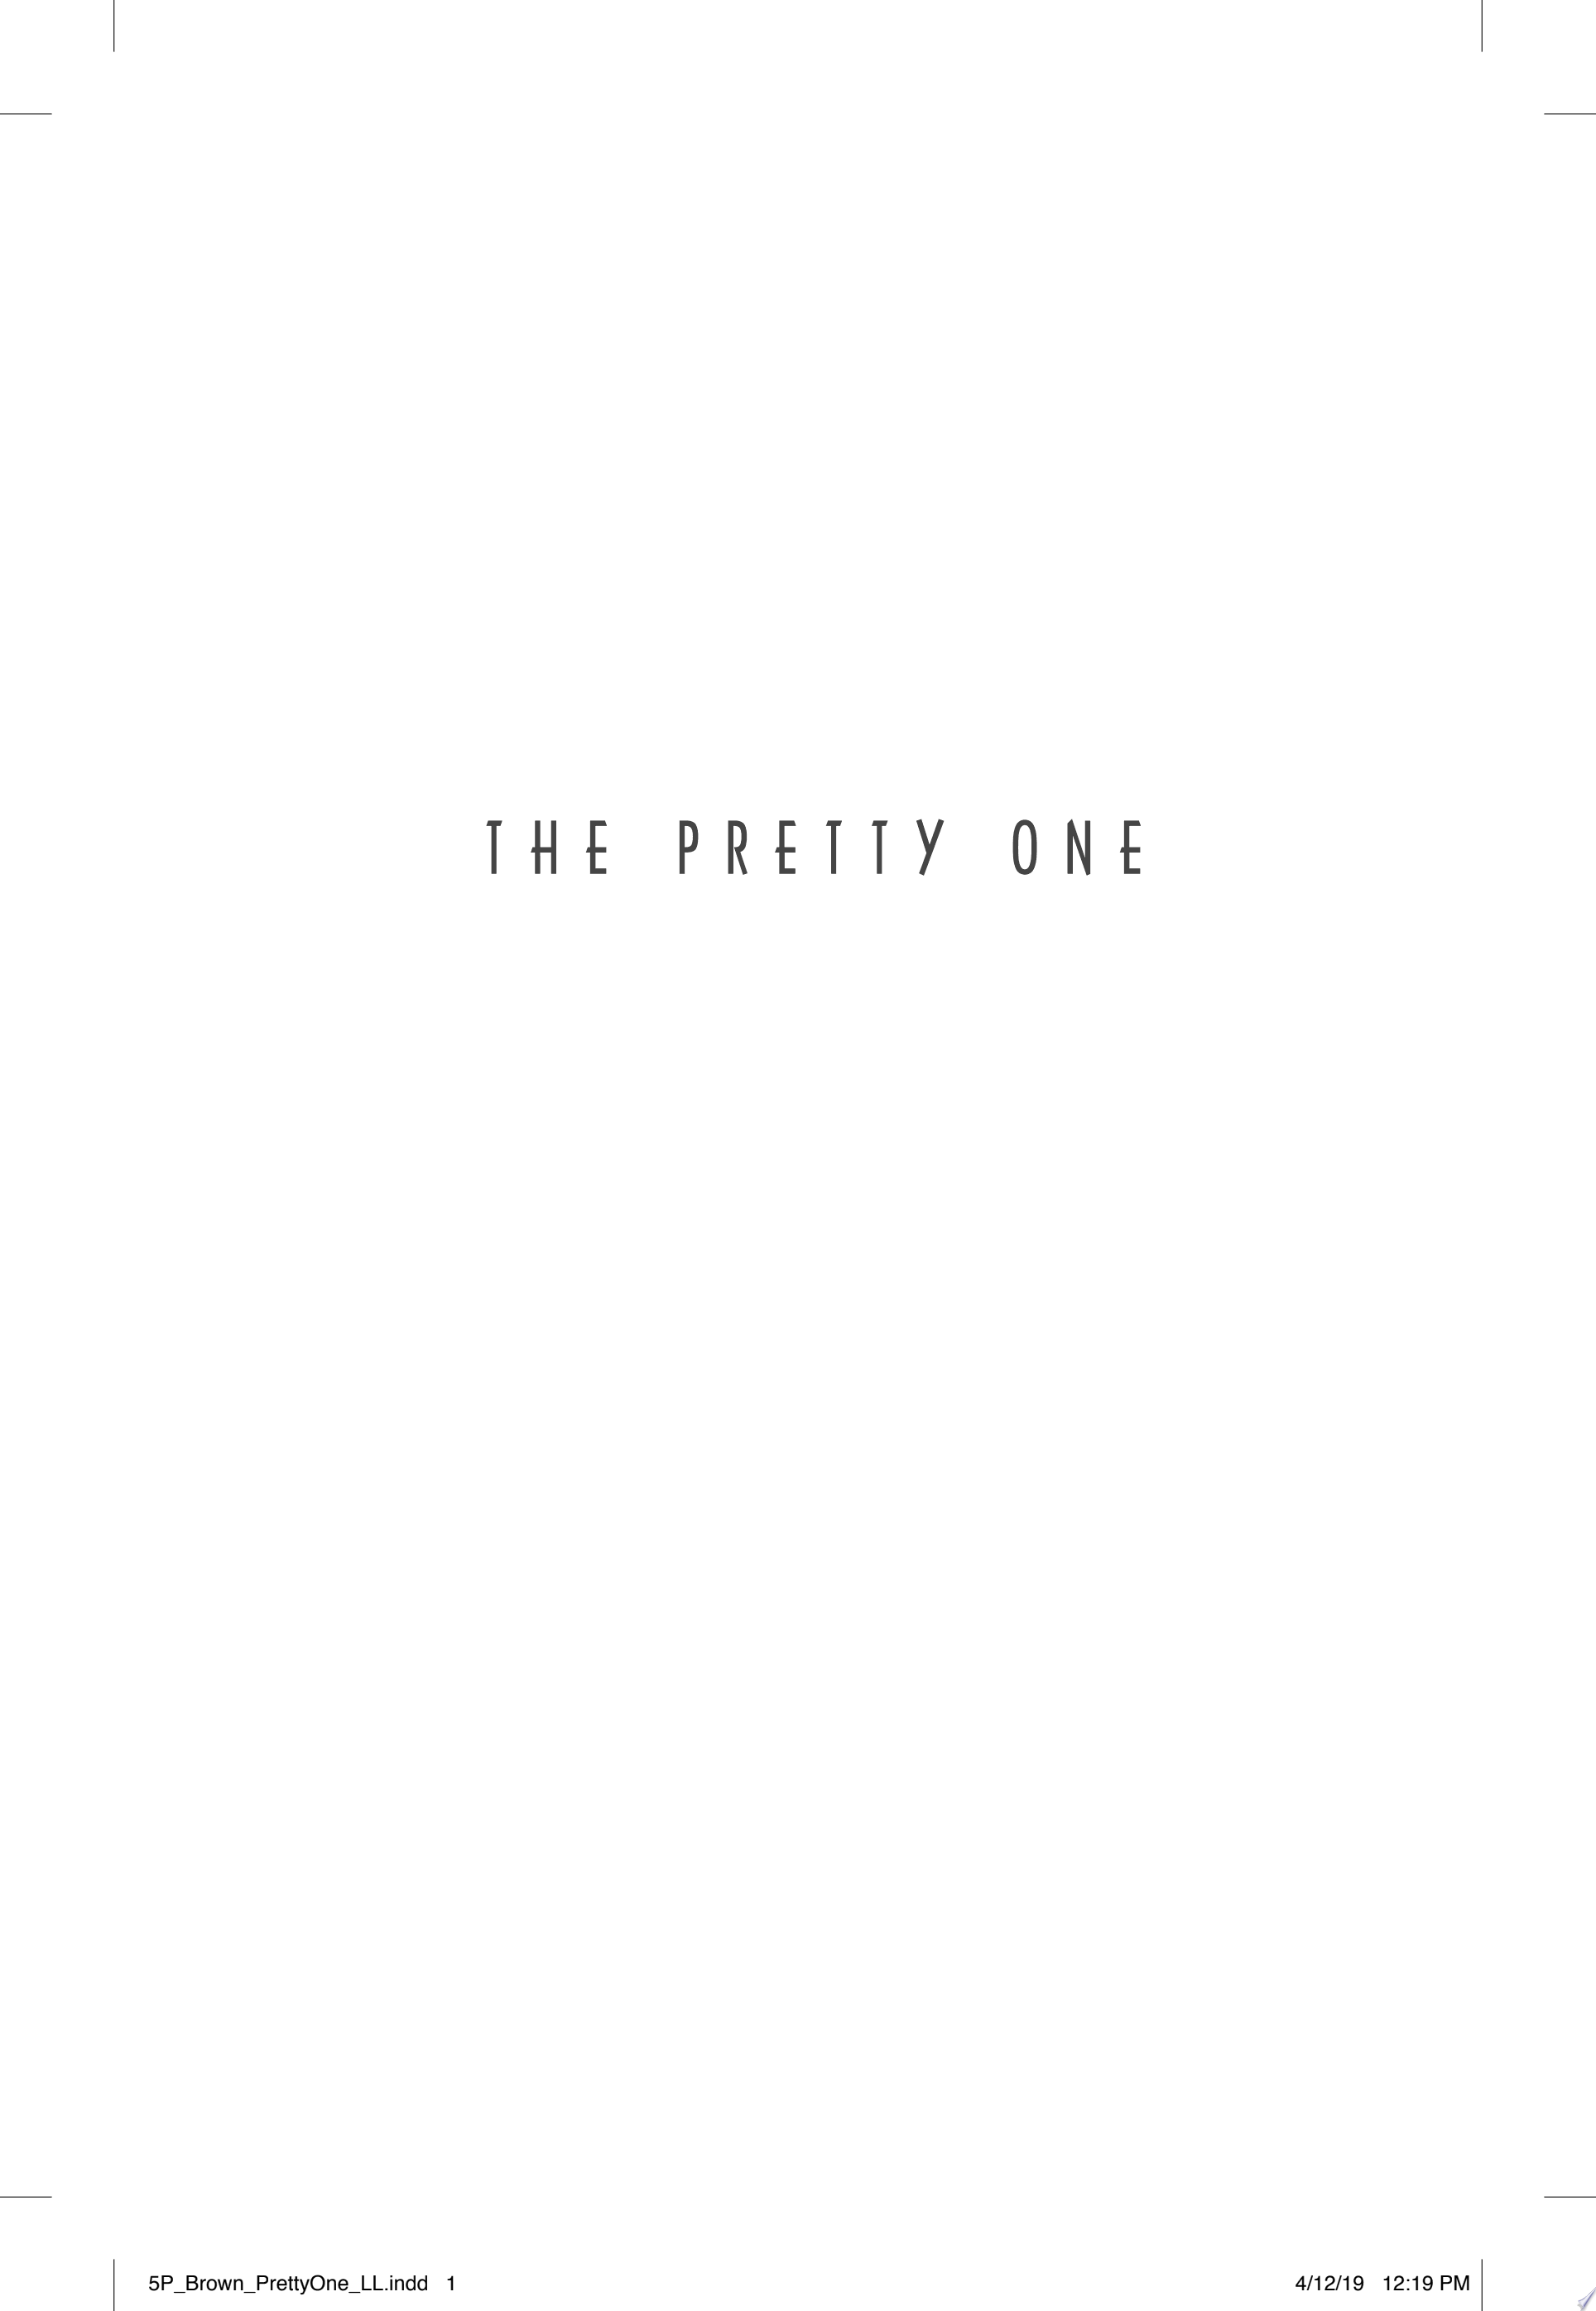 Image for "The Pretty One"